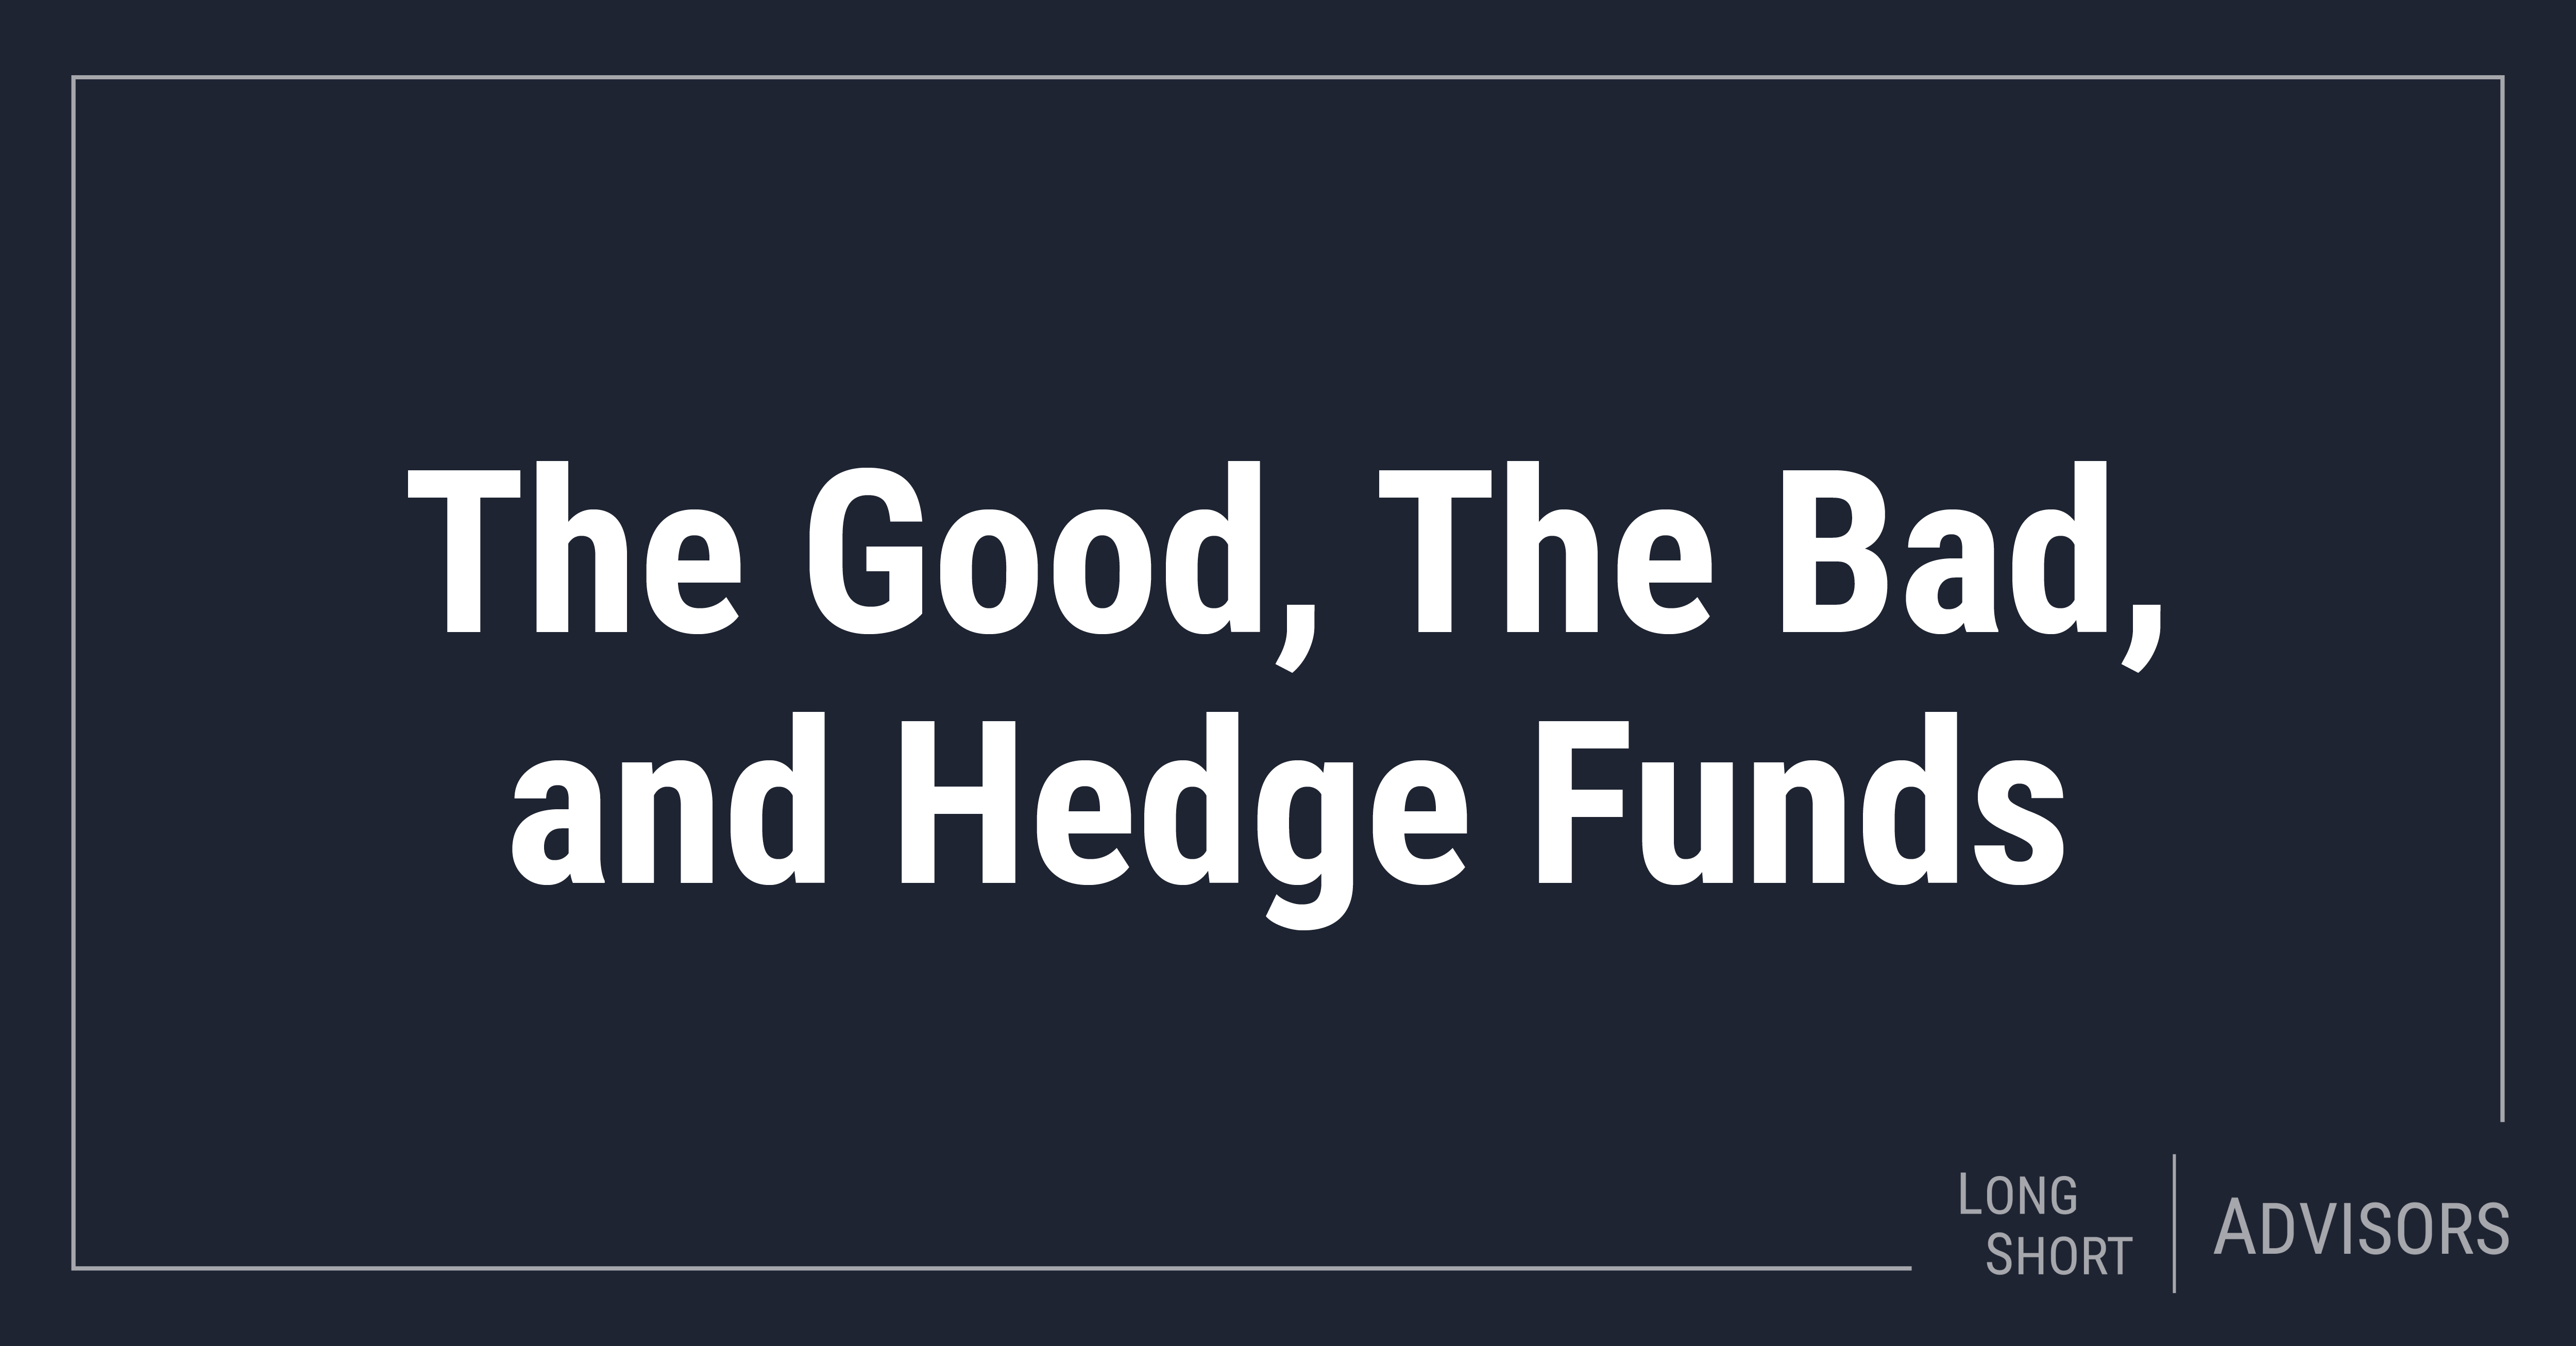 The Good, The Bad, and Hedge Funds